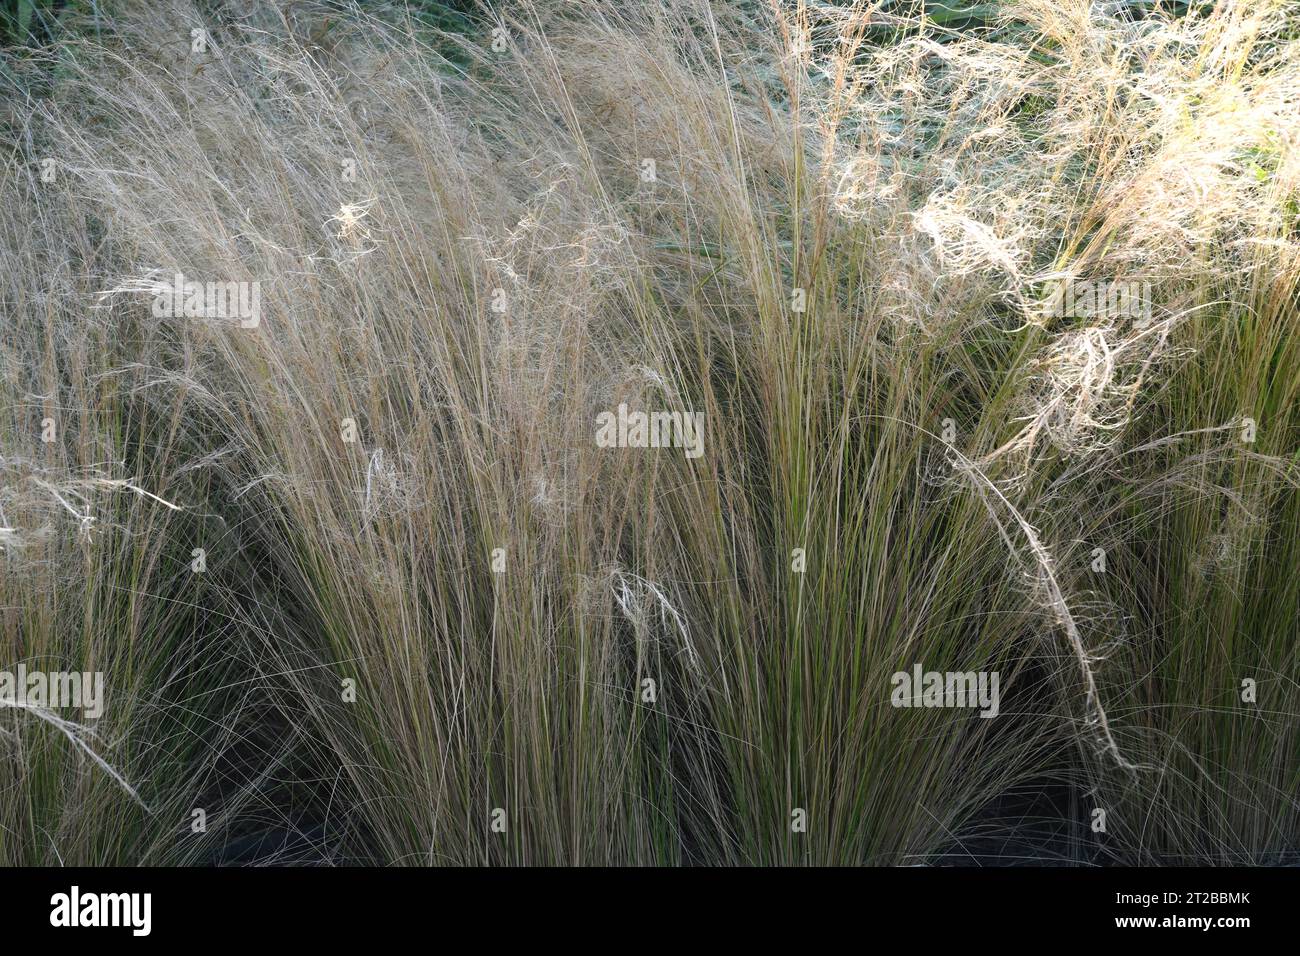 Argentine needle-grass or Mexican feathergrass (Nassella tenuissima) is a perennial herb native of Argentine and naturalized in North America. Stock Photo